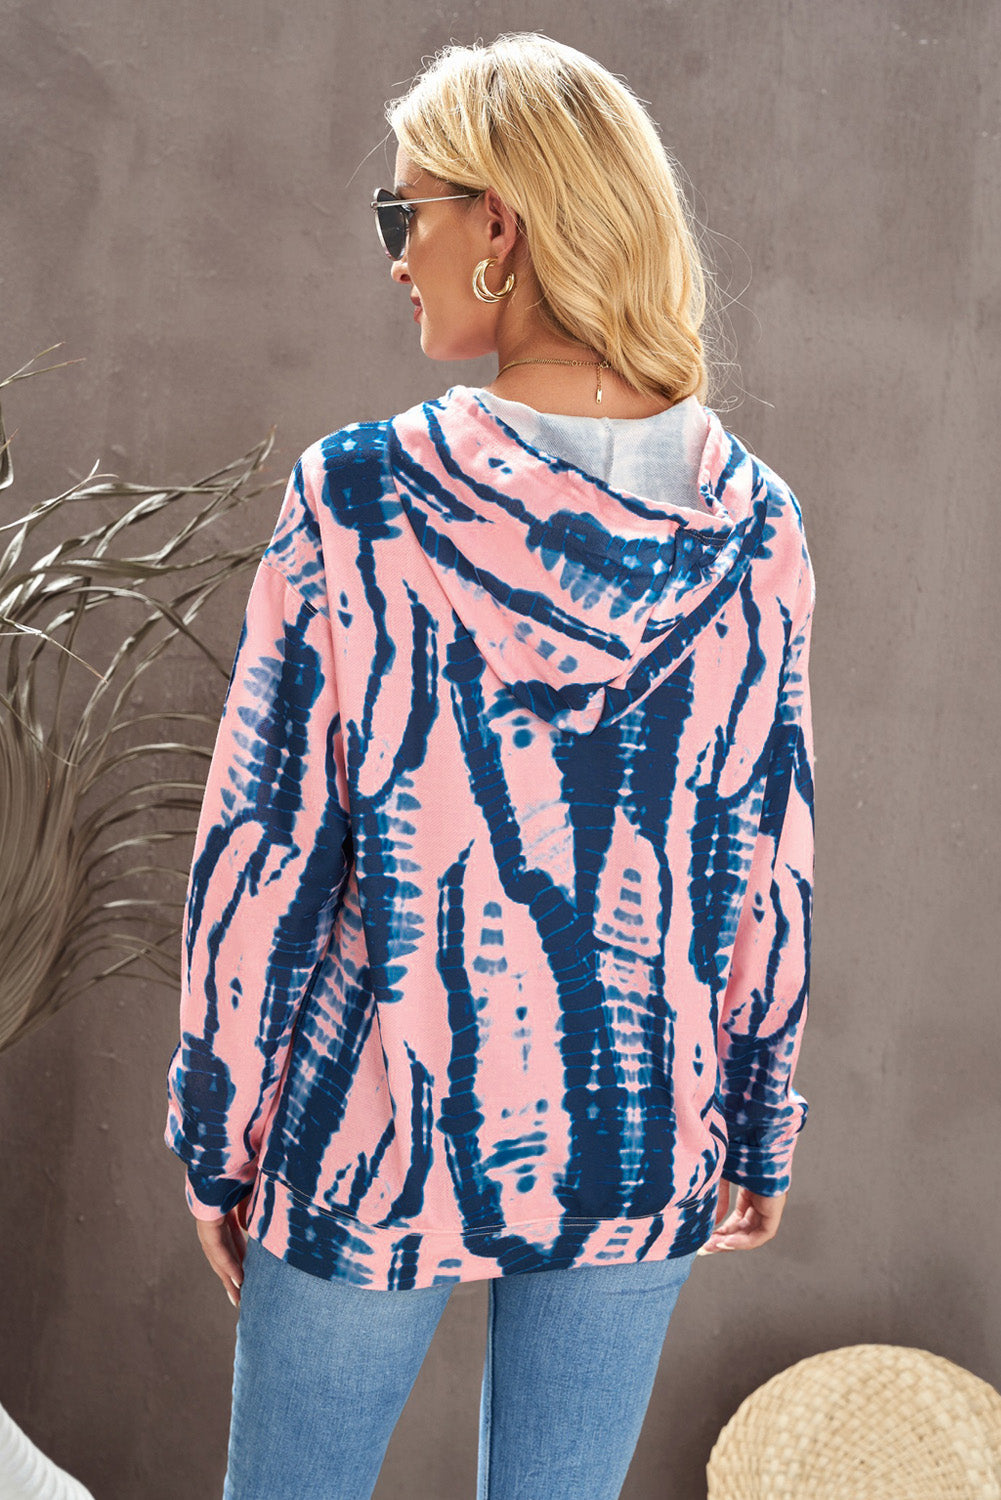 Tie-Dye Drawstring Hoodie with Pocket - A Romantic Reminder of Your Love - Embrace Comfort and Style - Guy Christopher 